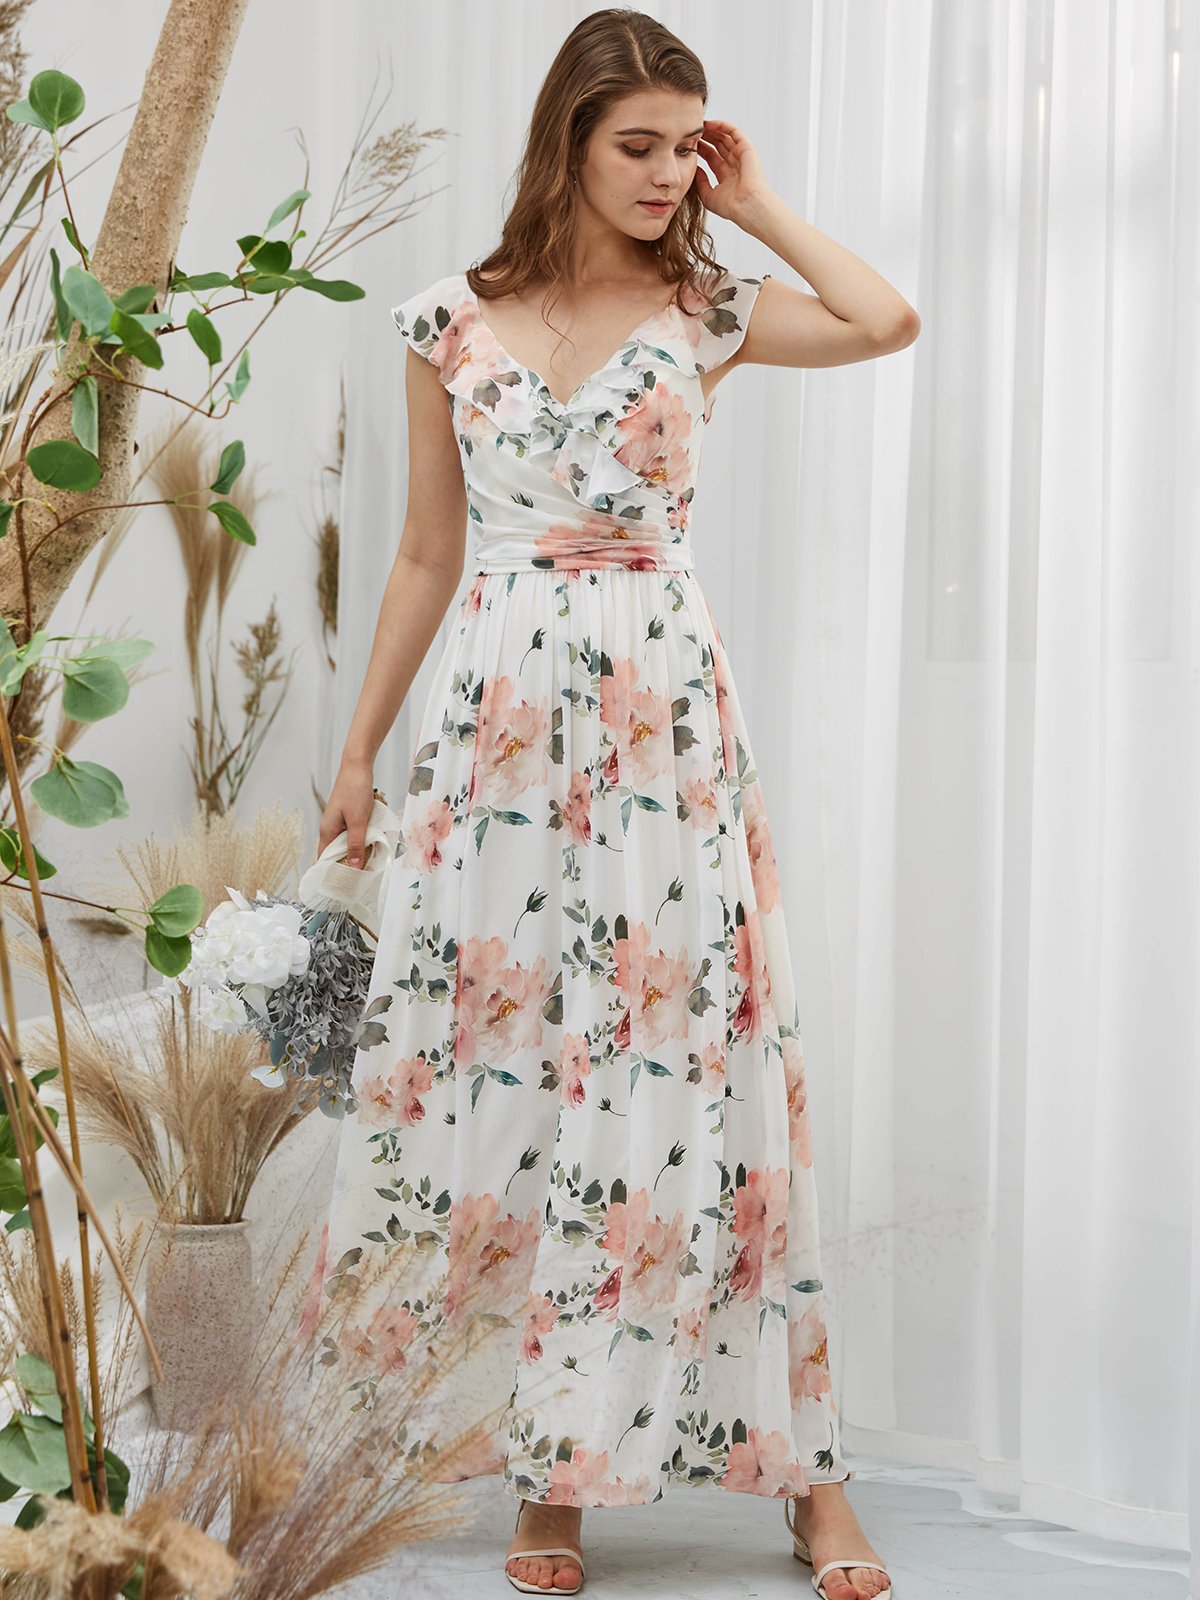 Straps V Neck Chiffon Print Floral Peach Floor Length Formal Evening Gown